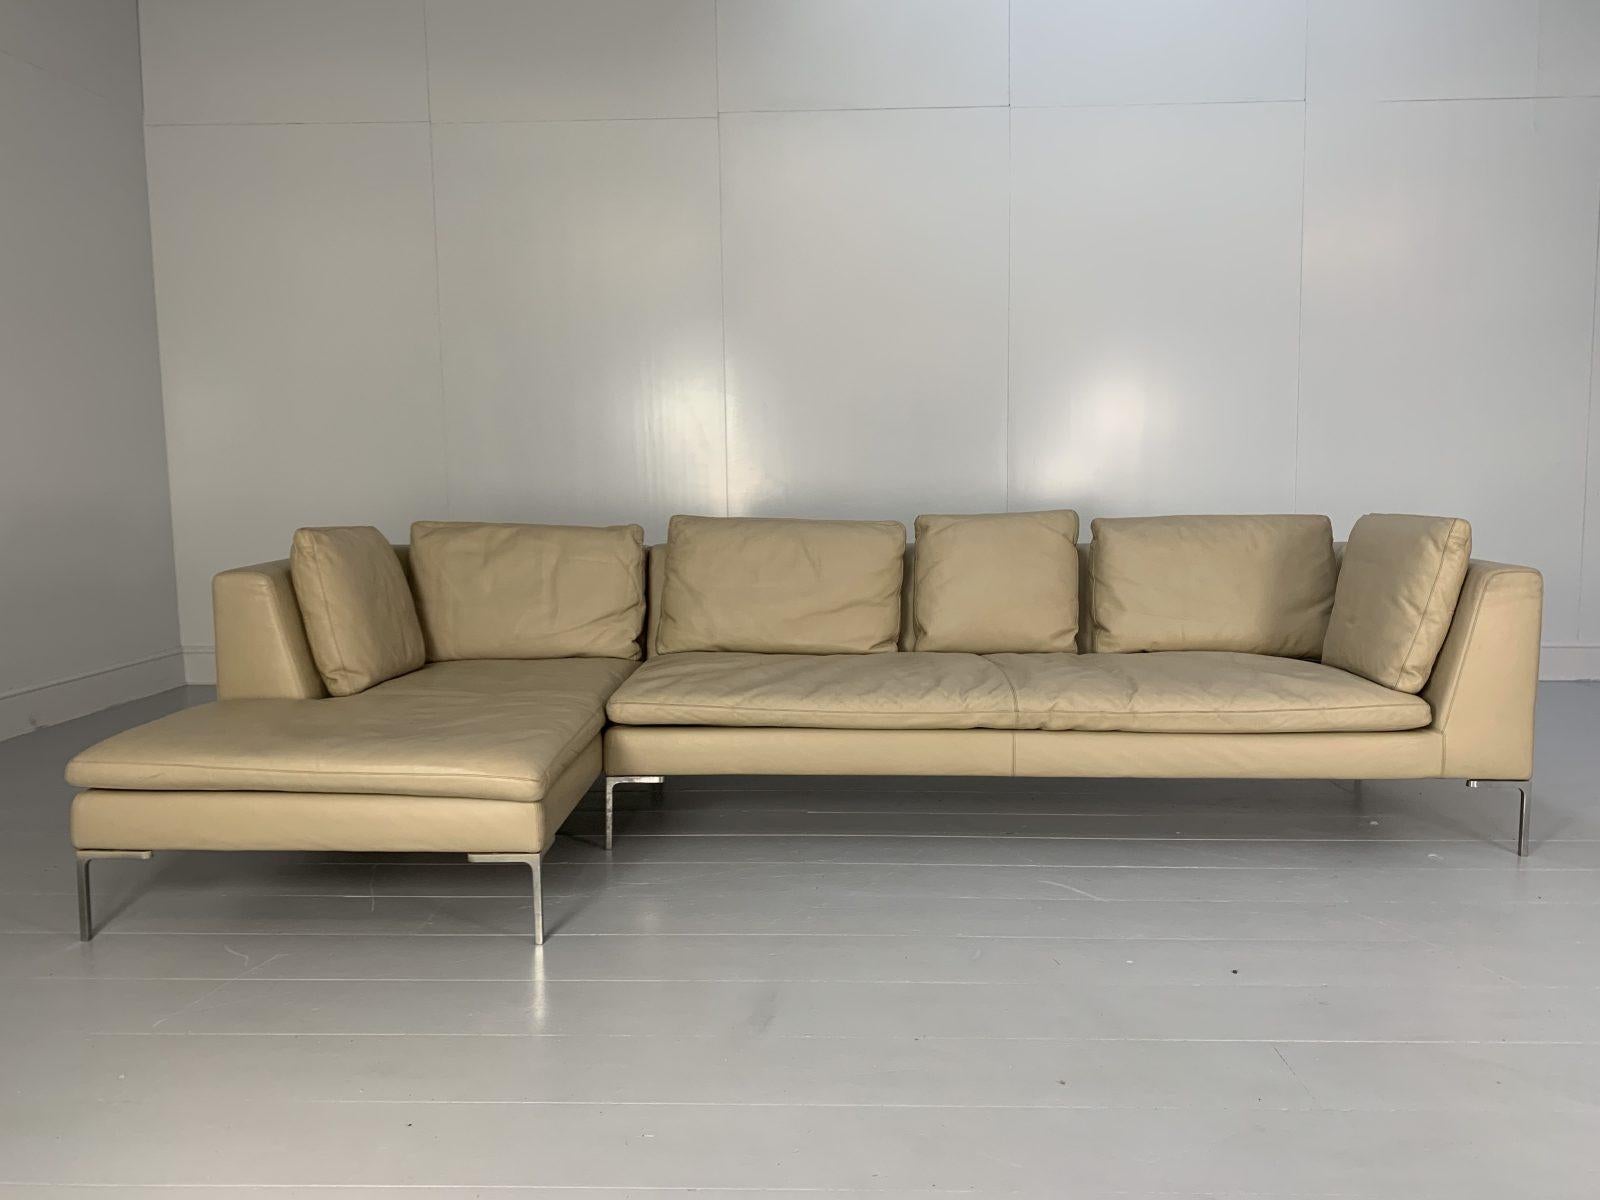 Hello Friends, and welcome to another unmissable offering from Lord Browns Furniture, the UK’s premier resource for fine Sofas and Chairs.

On offer on this occasion is an iconic “Charles” Sectional L-Shape Sofa (consisting of a CH156LS section